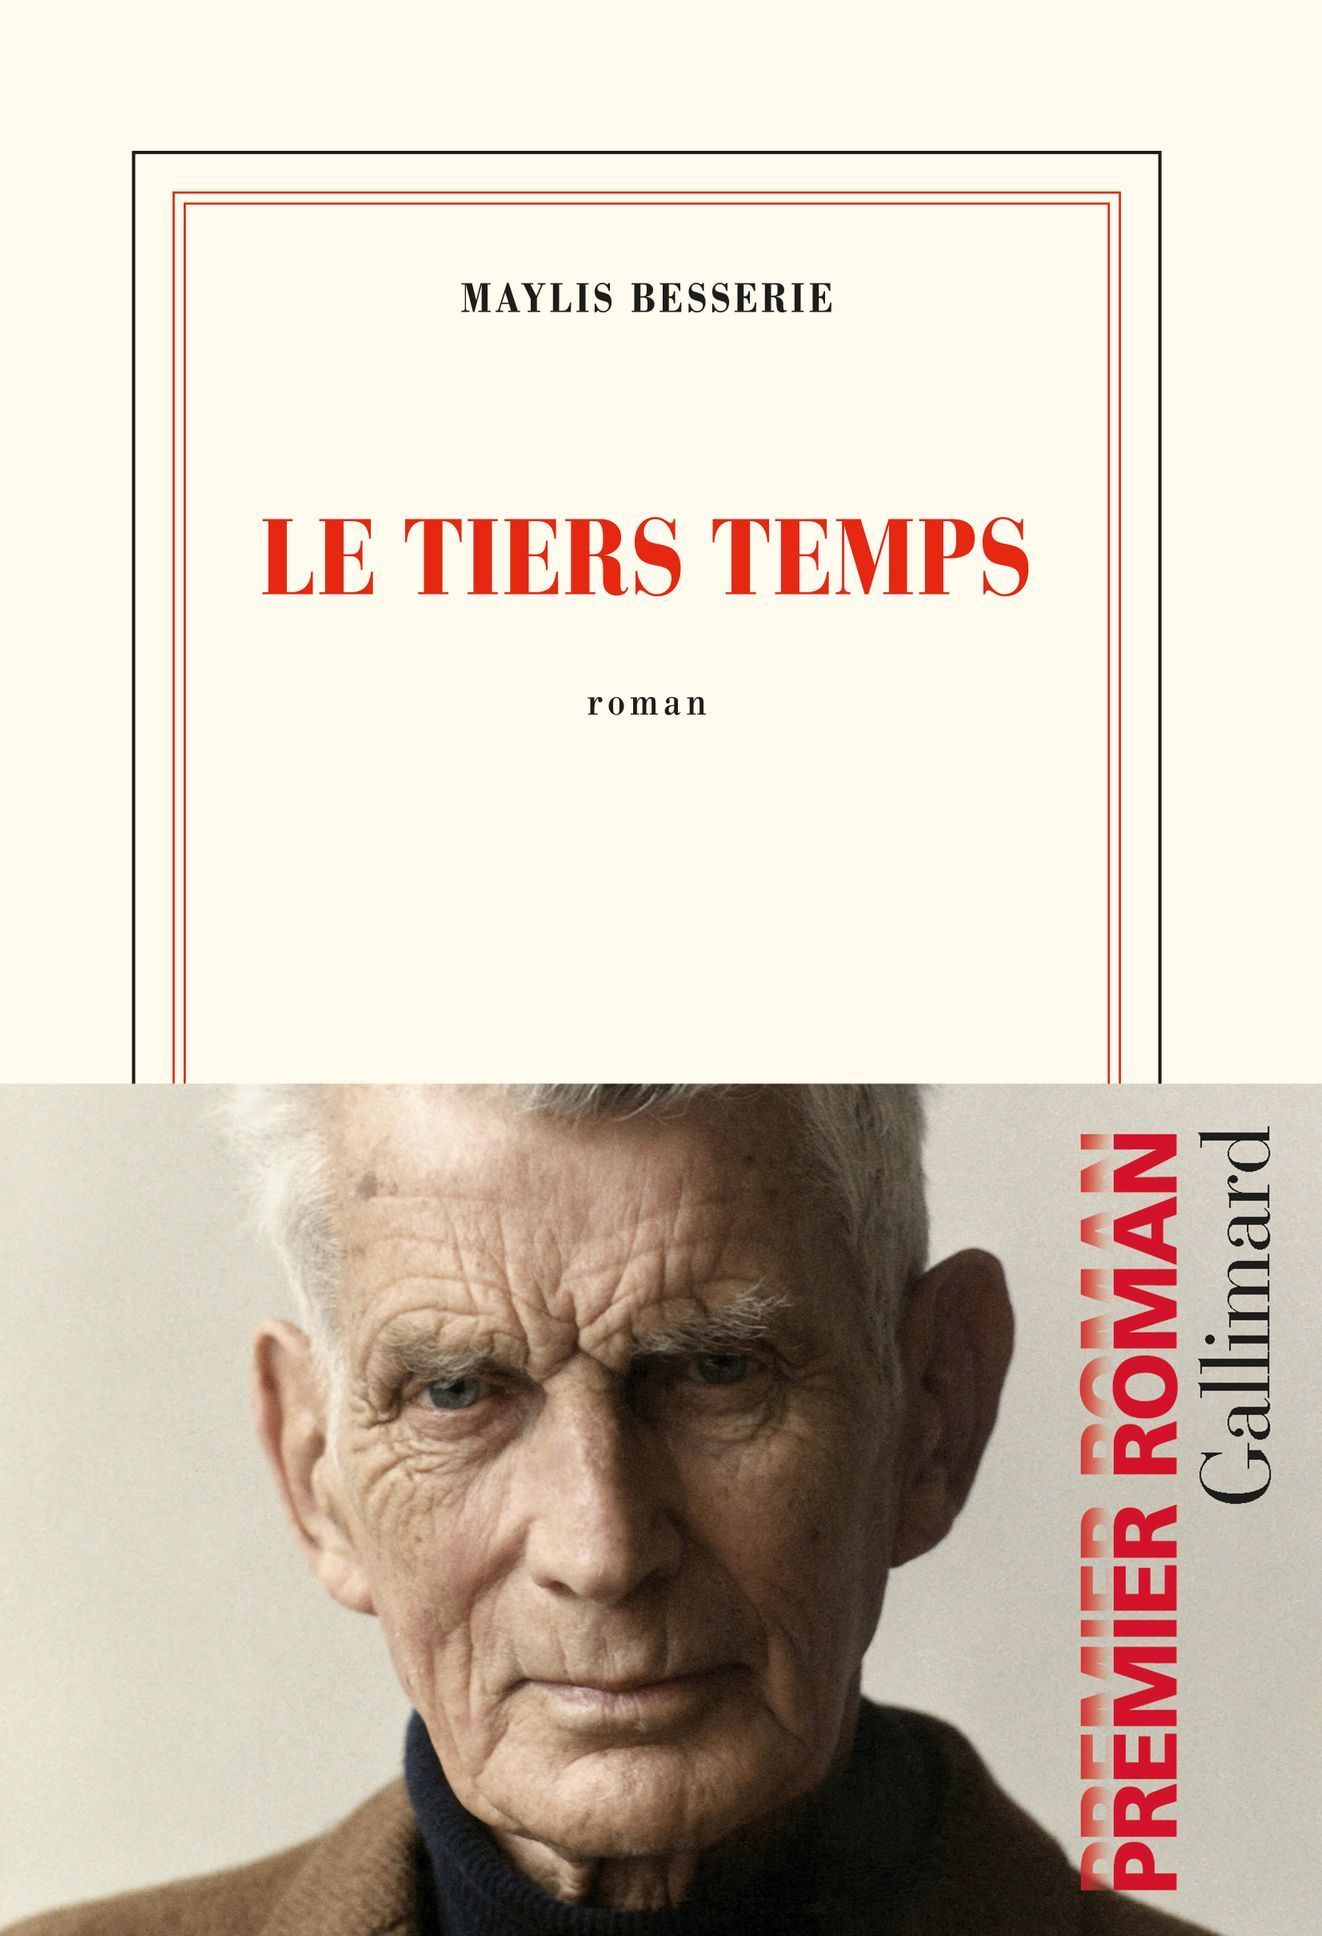 Maylis Besserie: Le tiers temps